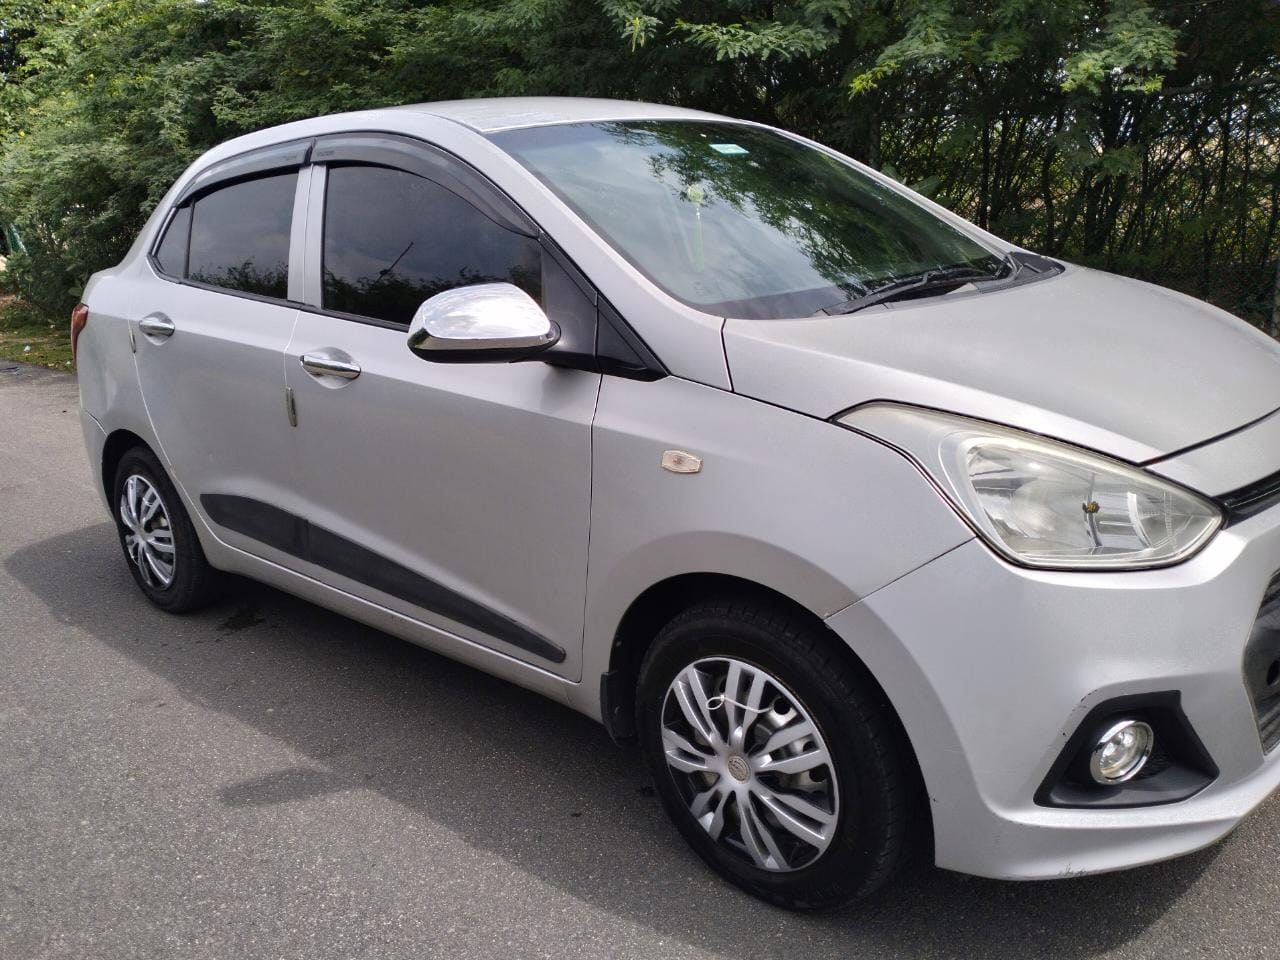 4969-for-sale-Hyundai-Xcent-Diesel-Second-Owner-2016-TN-registered-rs-349000